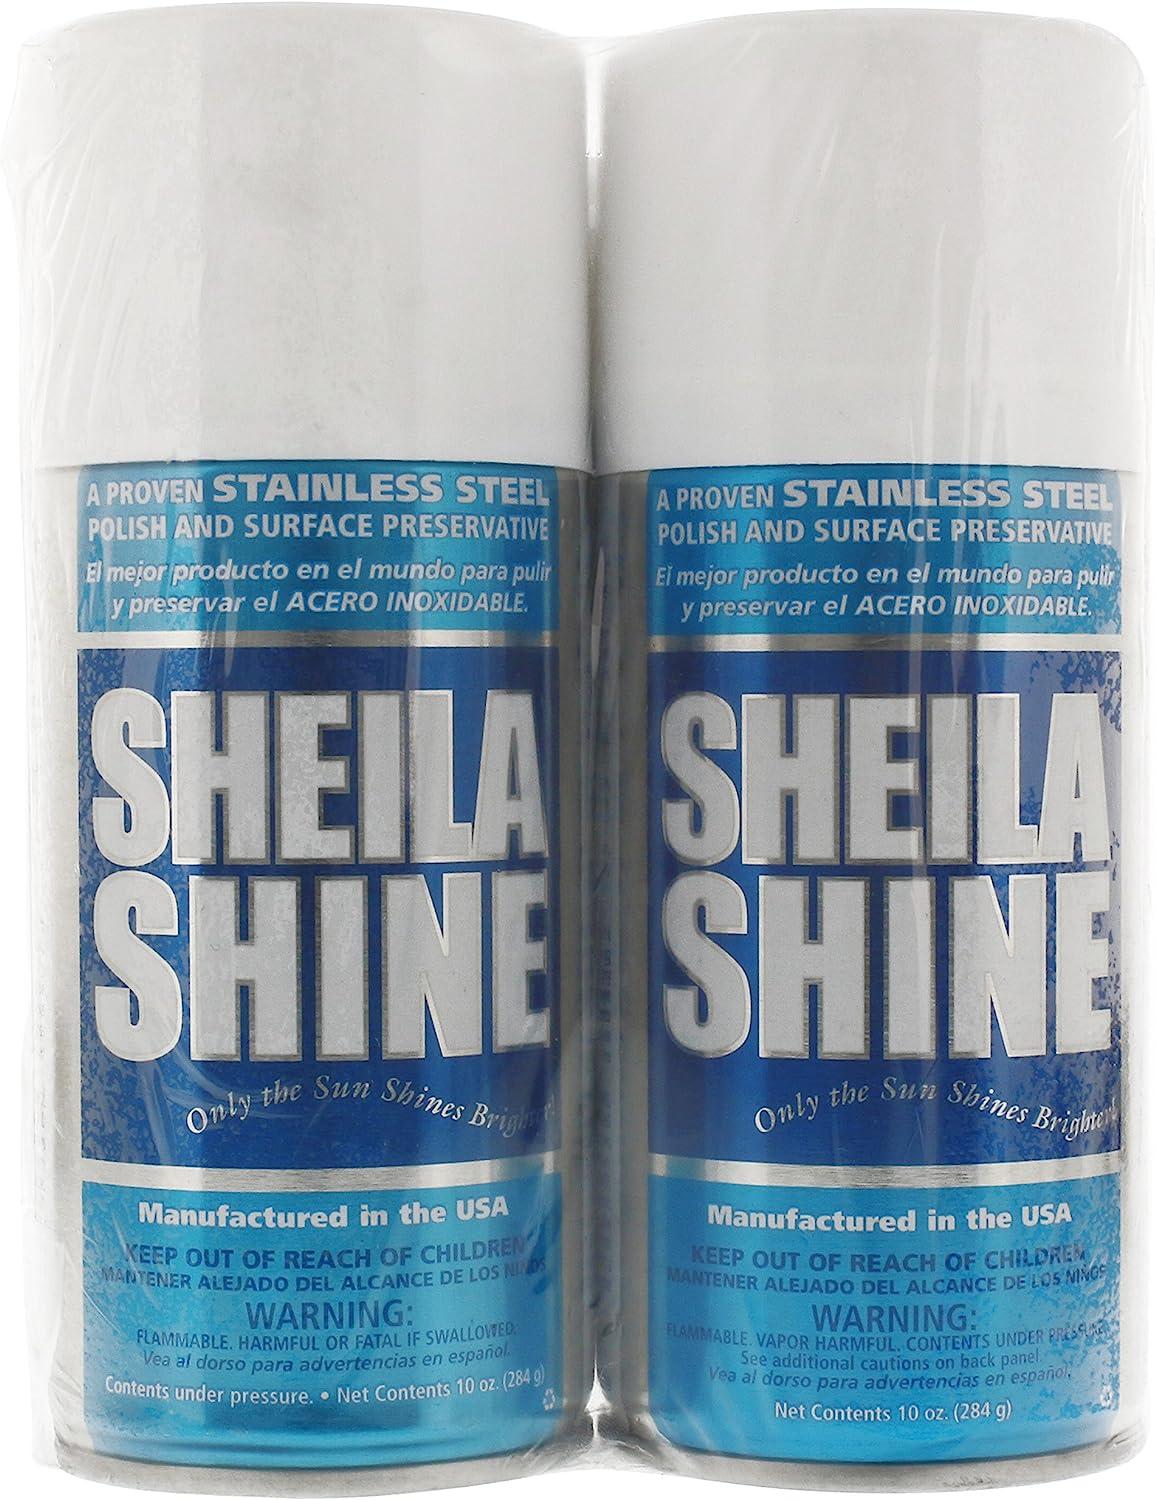 Sheila Shine 4 Gal Stainless Steel Cleaner & Polish | 4 x 1 Gal Cans per  Carton | Residue & Streak Free | Made in USA